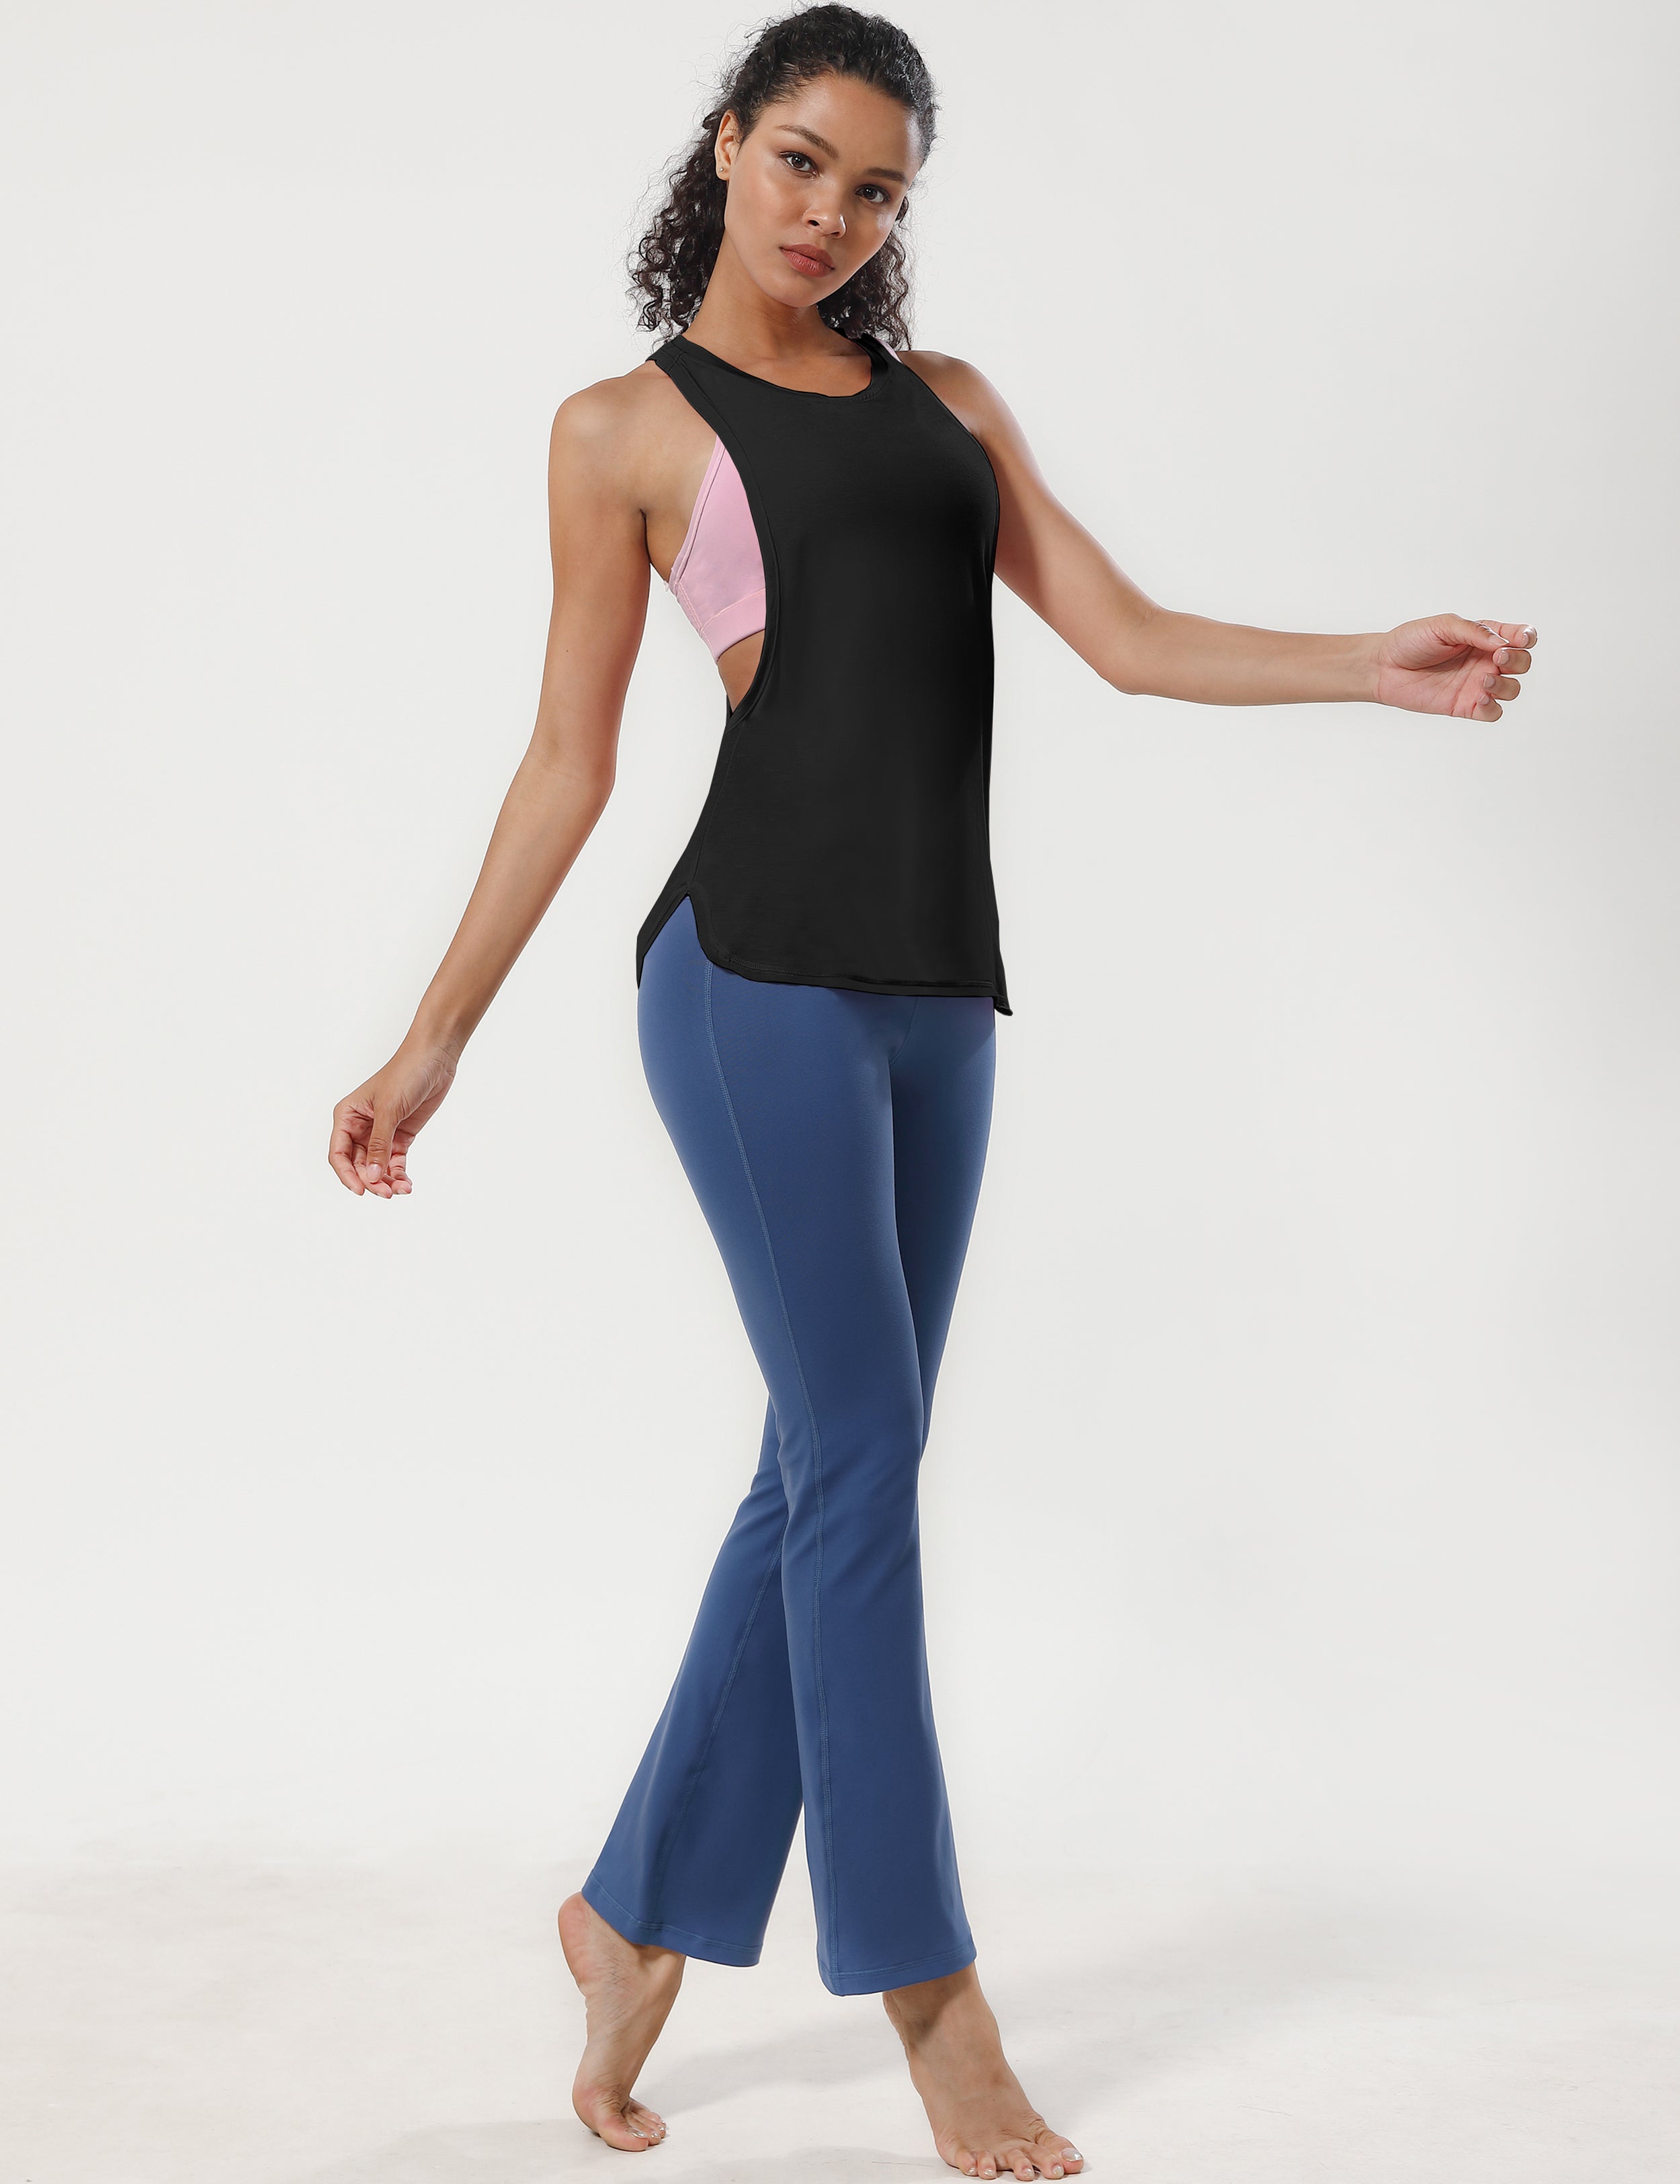 Low Cut Loose Fit Tank Top black Designed for On the Move Loose fit 93%Modal/7%Spandex Four-way stretch Naturally breathable Super-Soft, Modal Fabric